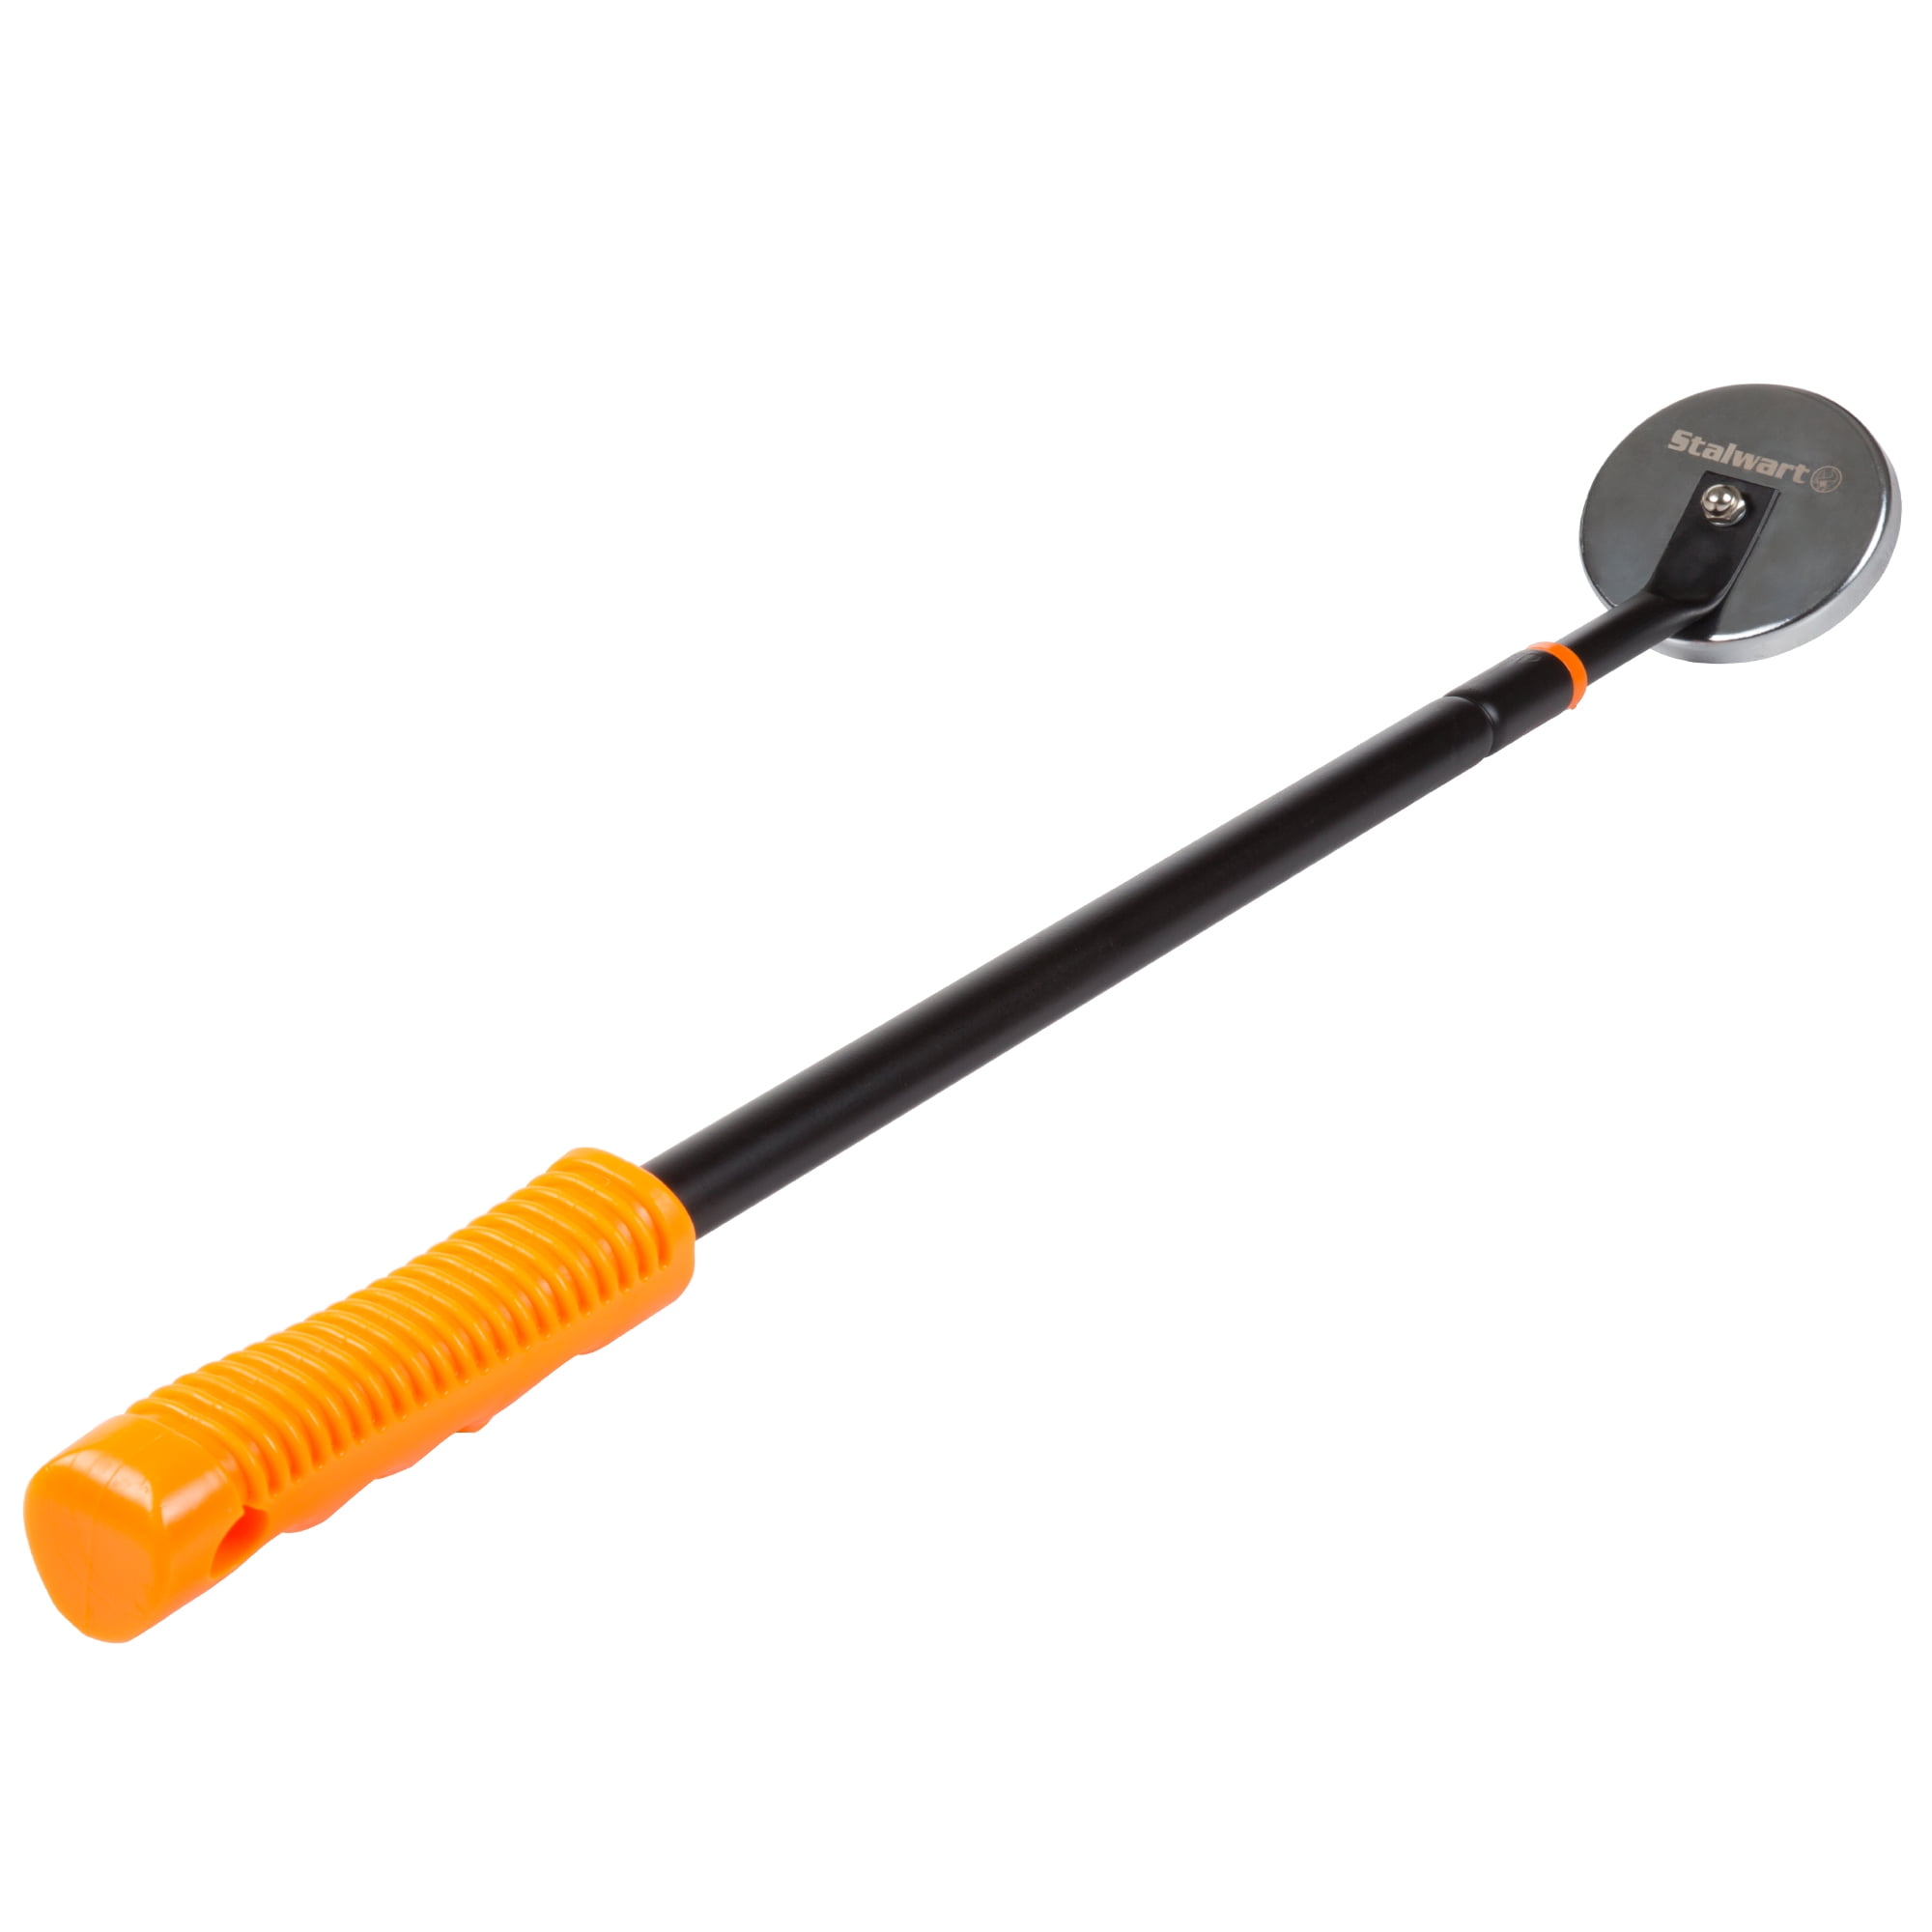 Magnet to Pickup Nails, Screws, and Metal Scraps Pull Capacity Orange 40 Inch by Stalwart Magnetic Pick Up Tool With 50 Lb